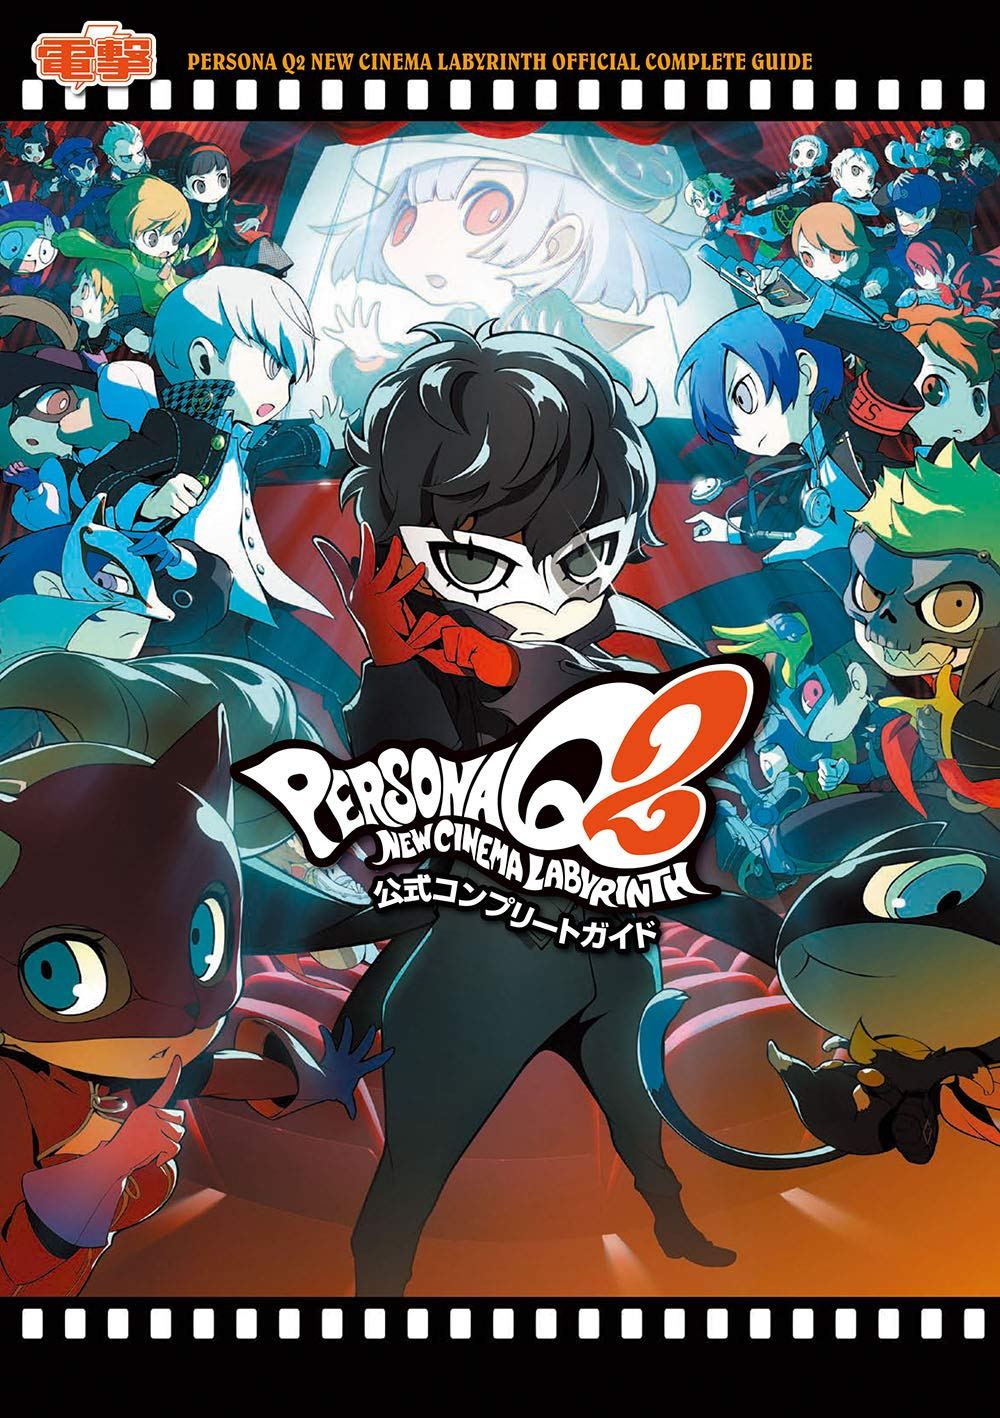 Persona Q2 New Cinema Labyrinth - Official Complete Guide